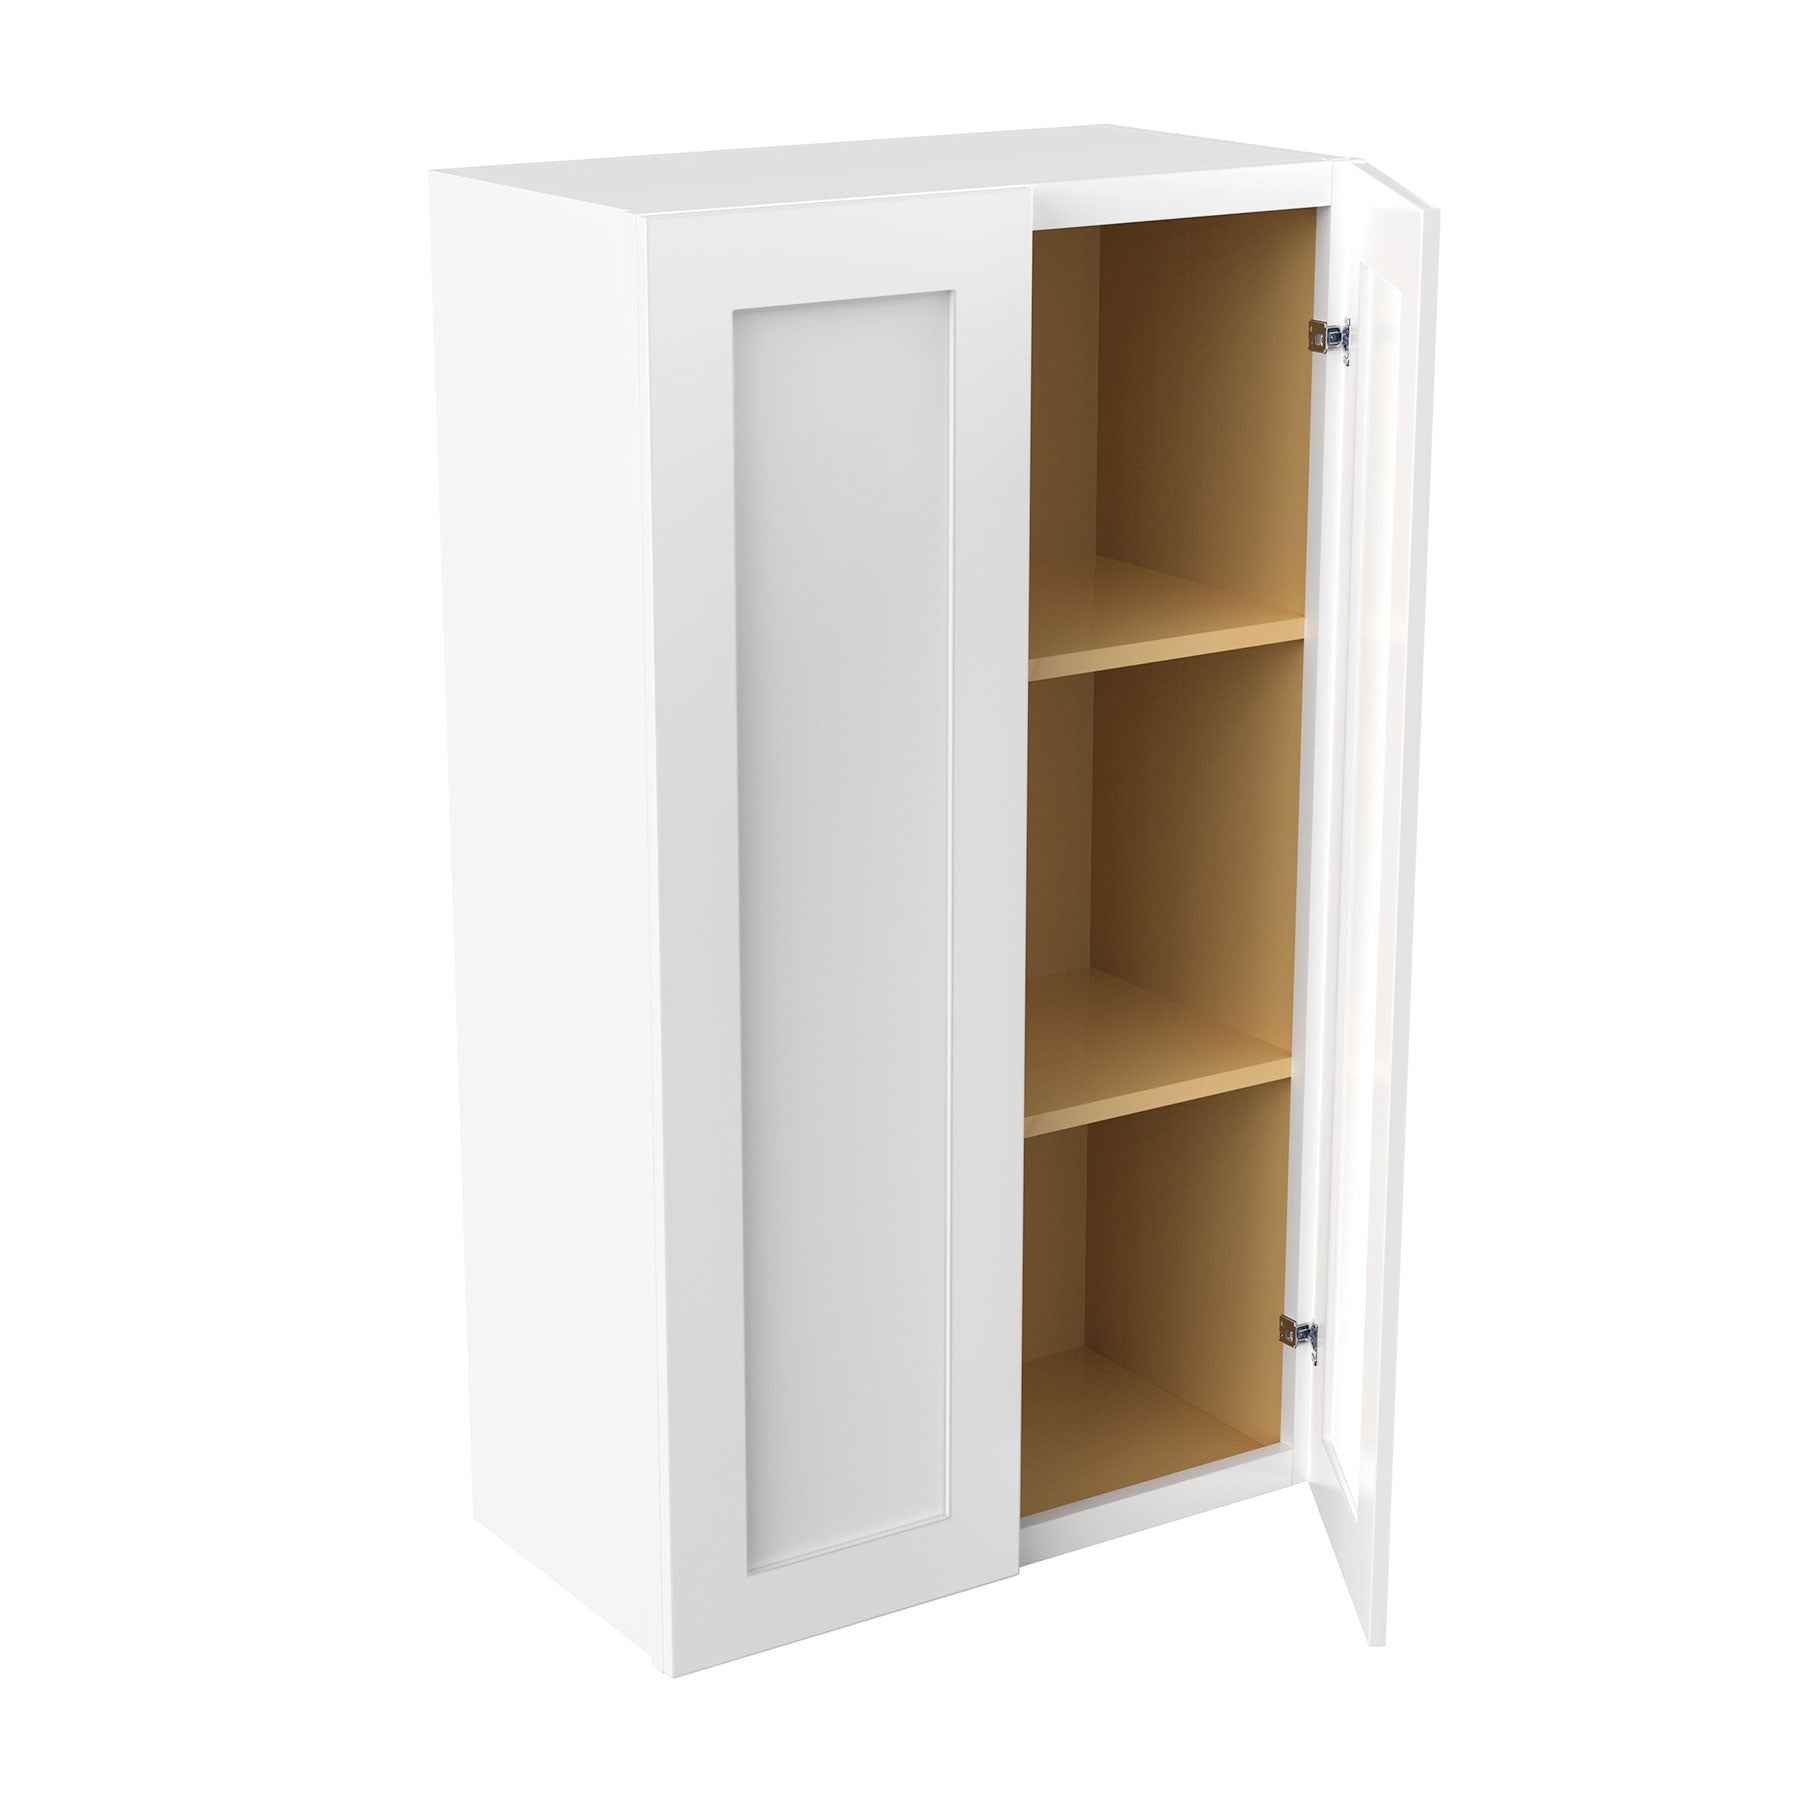 RTA - Elegant White - 42" High Double Door Wall Cabinet | 24"W x 42"H x 12"D